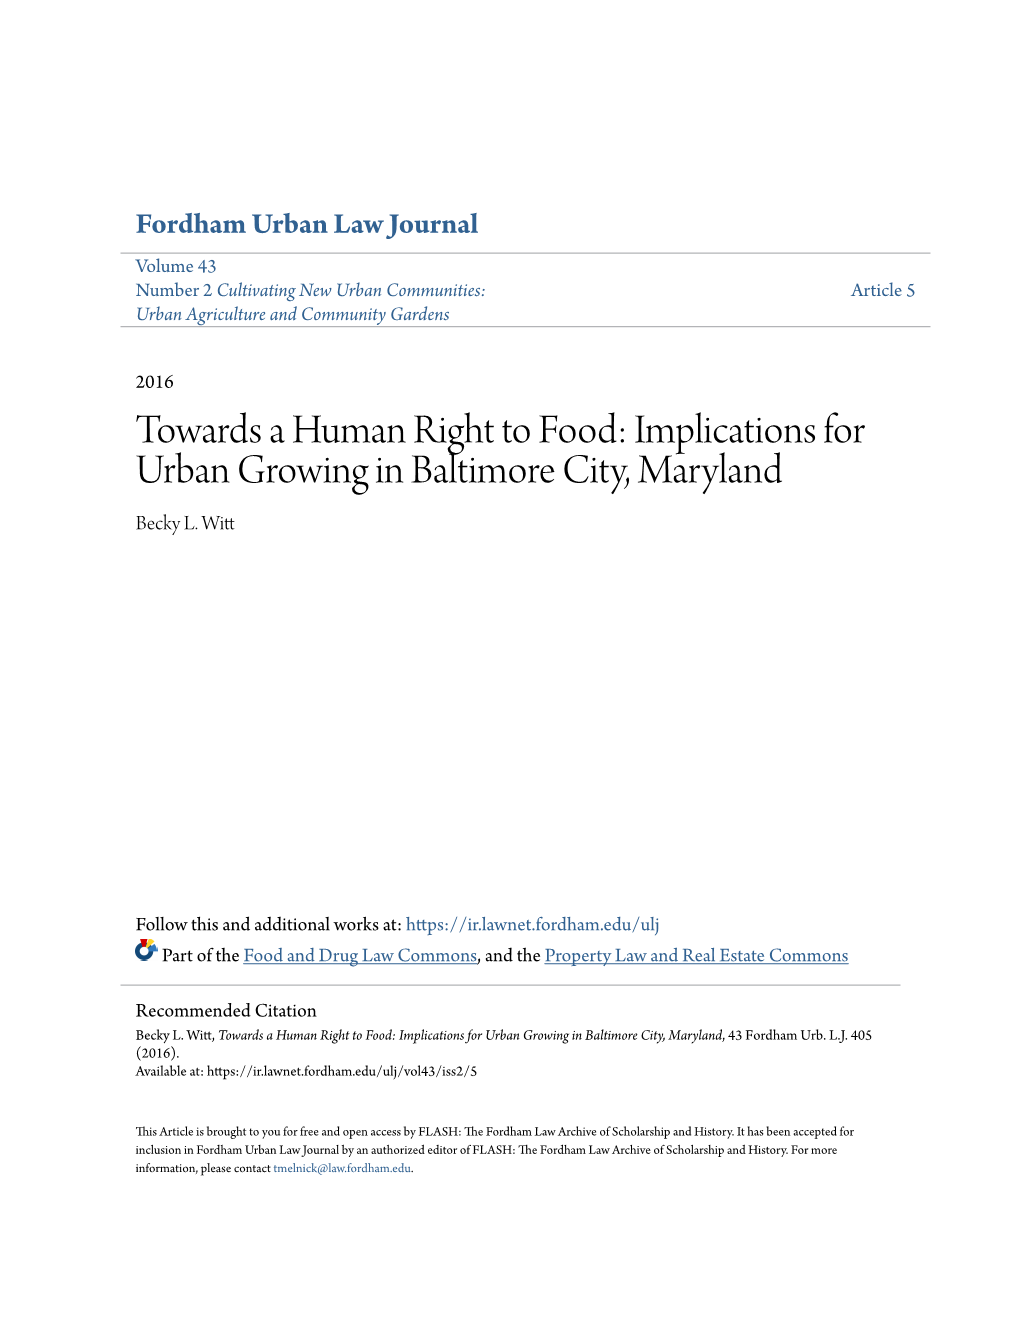 Towards a Human Right to Food: Implications for Urban Growing in Baltimore City, Maryland Becky L